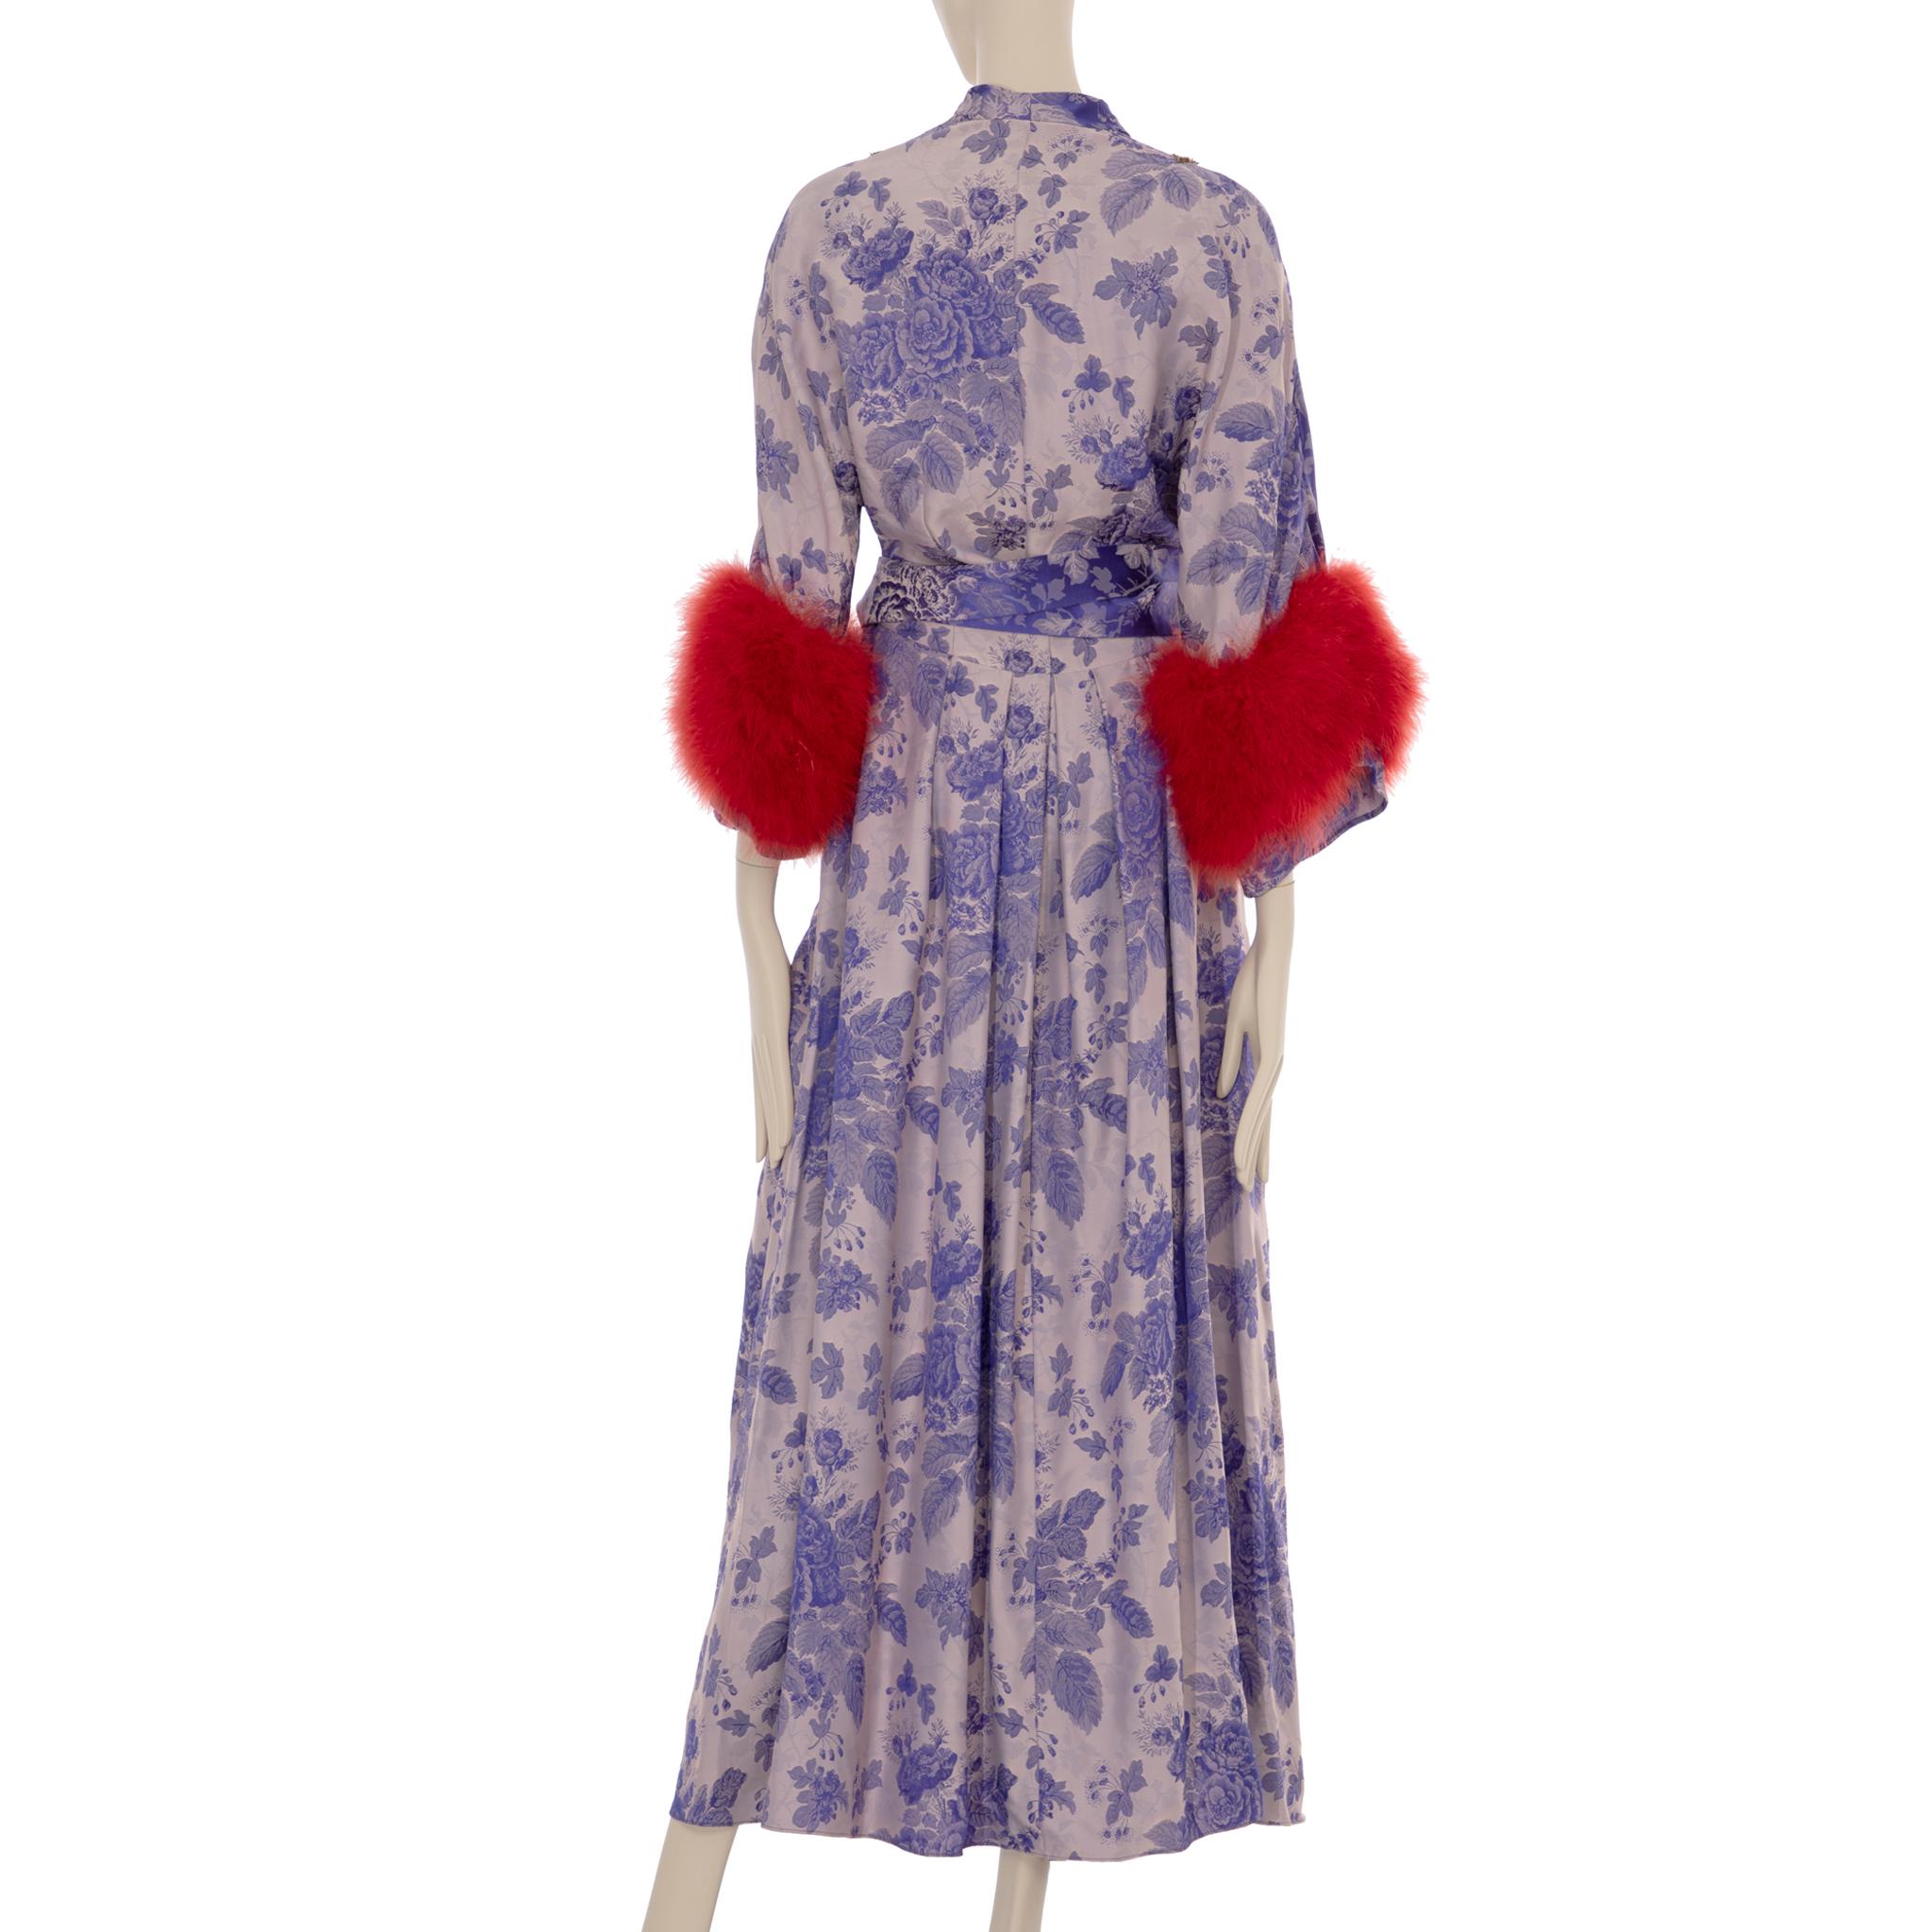 Gucci Floral Jacquard Wrap Dress With Ostrich Feathers 38 It For Sale 6